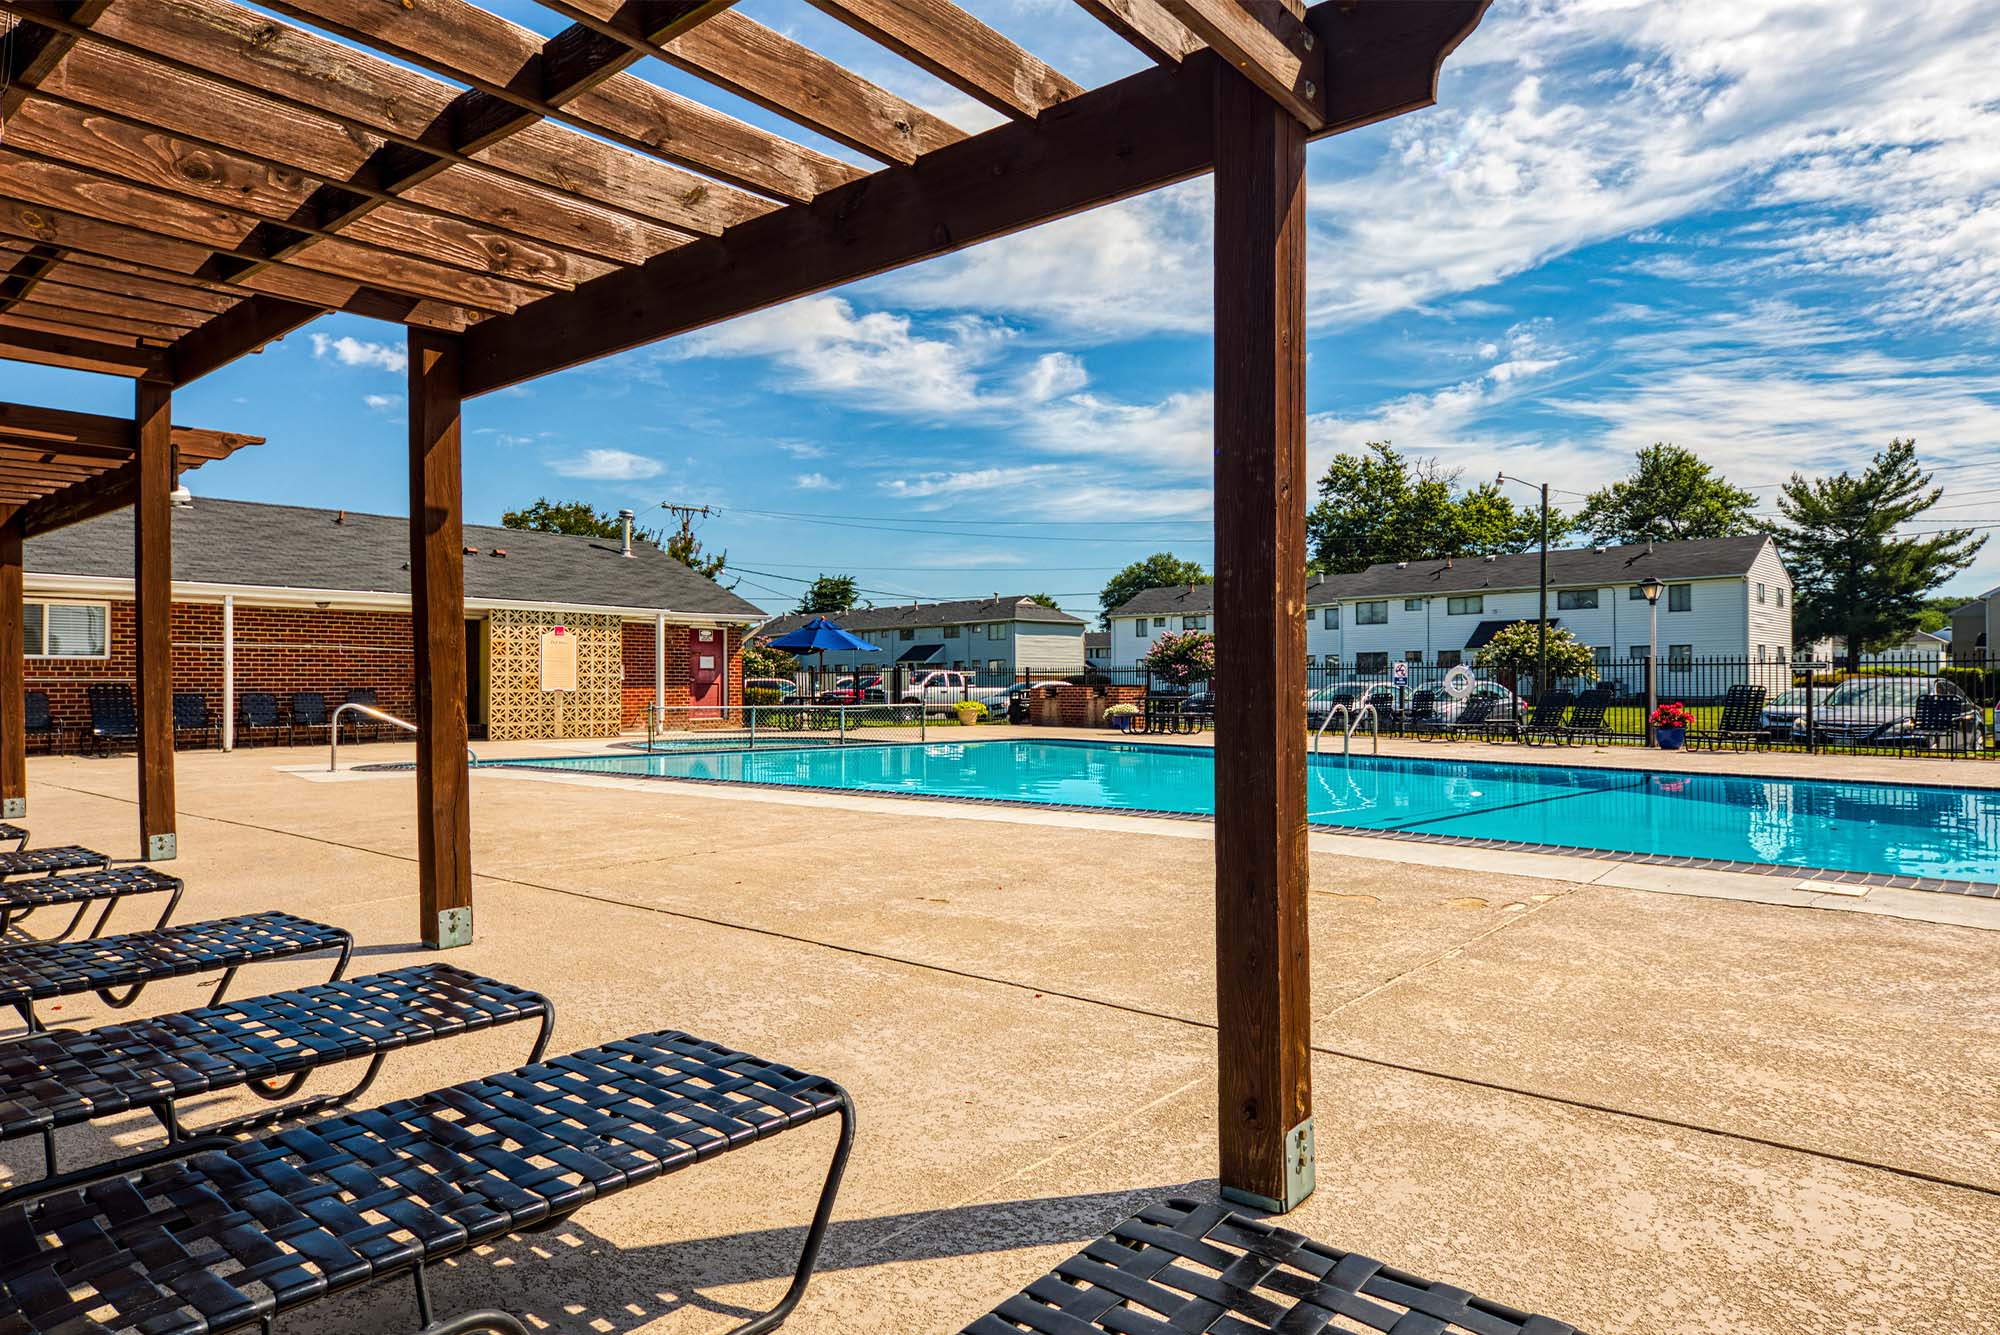 Outdoor swimming pool at Pointe at River City, Richmond, Virginia